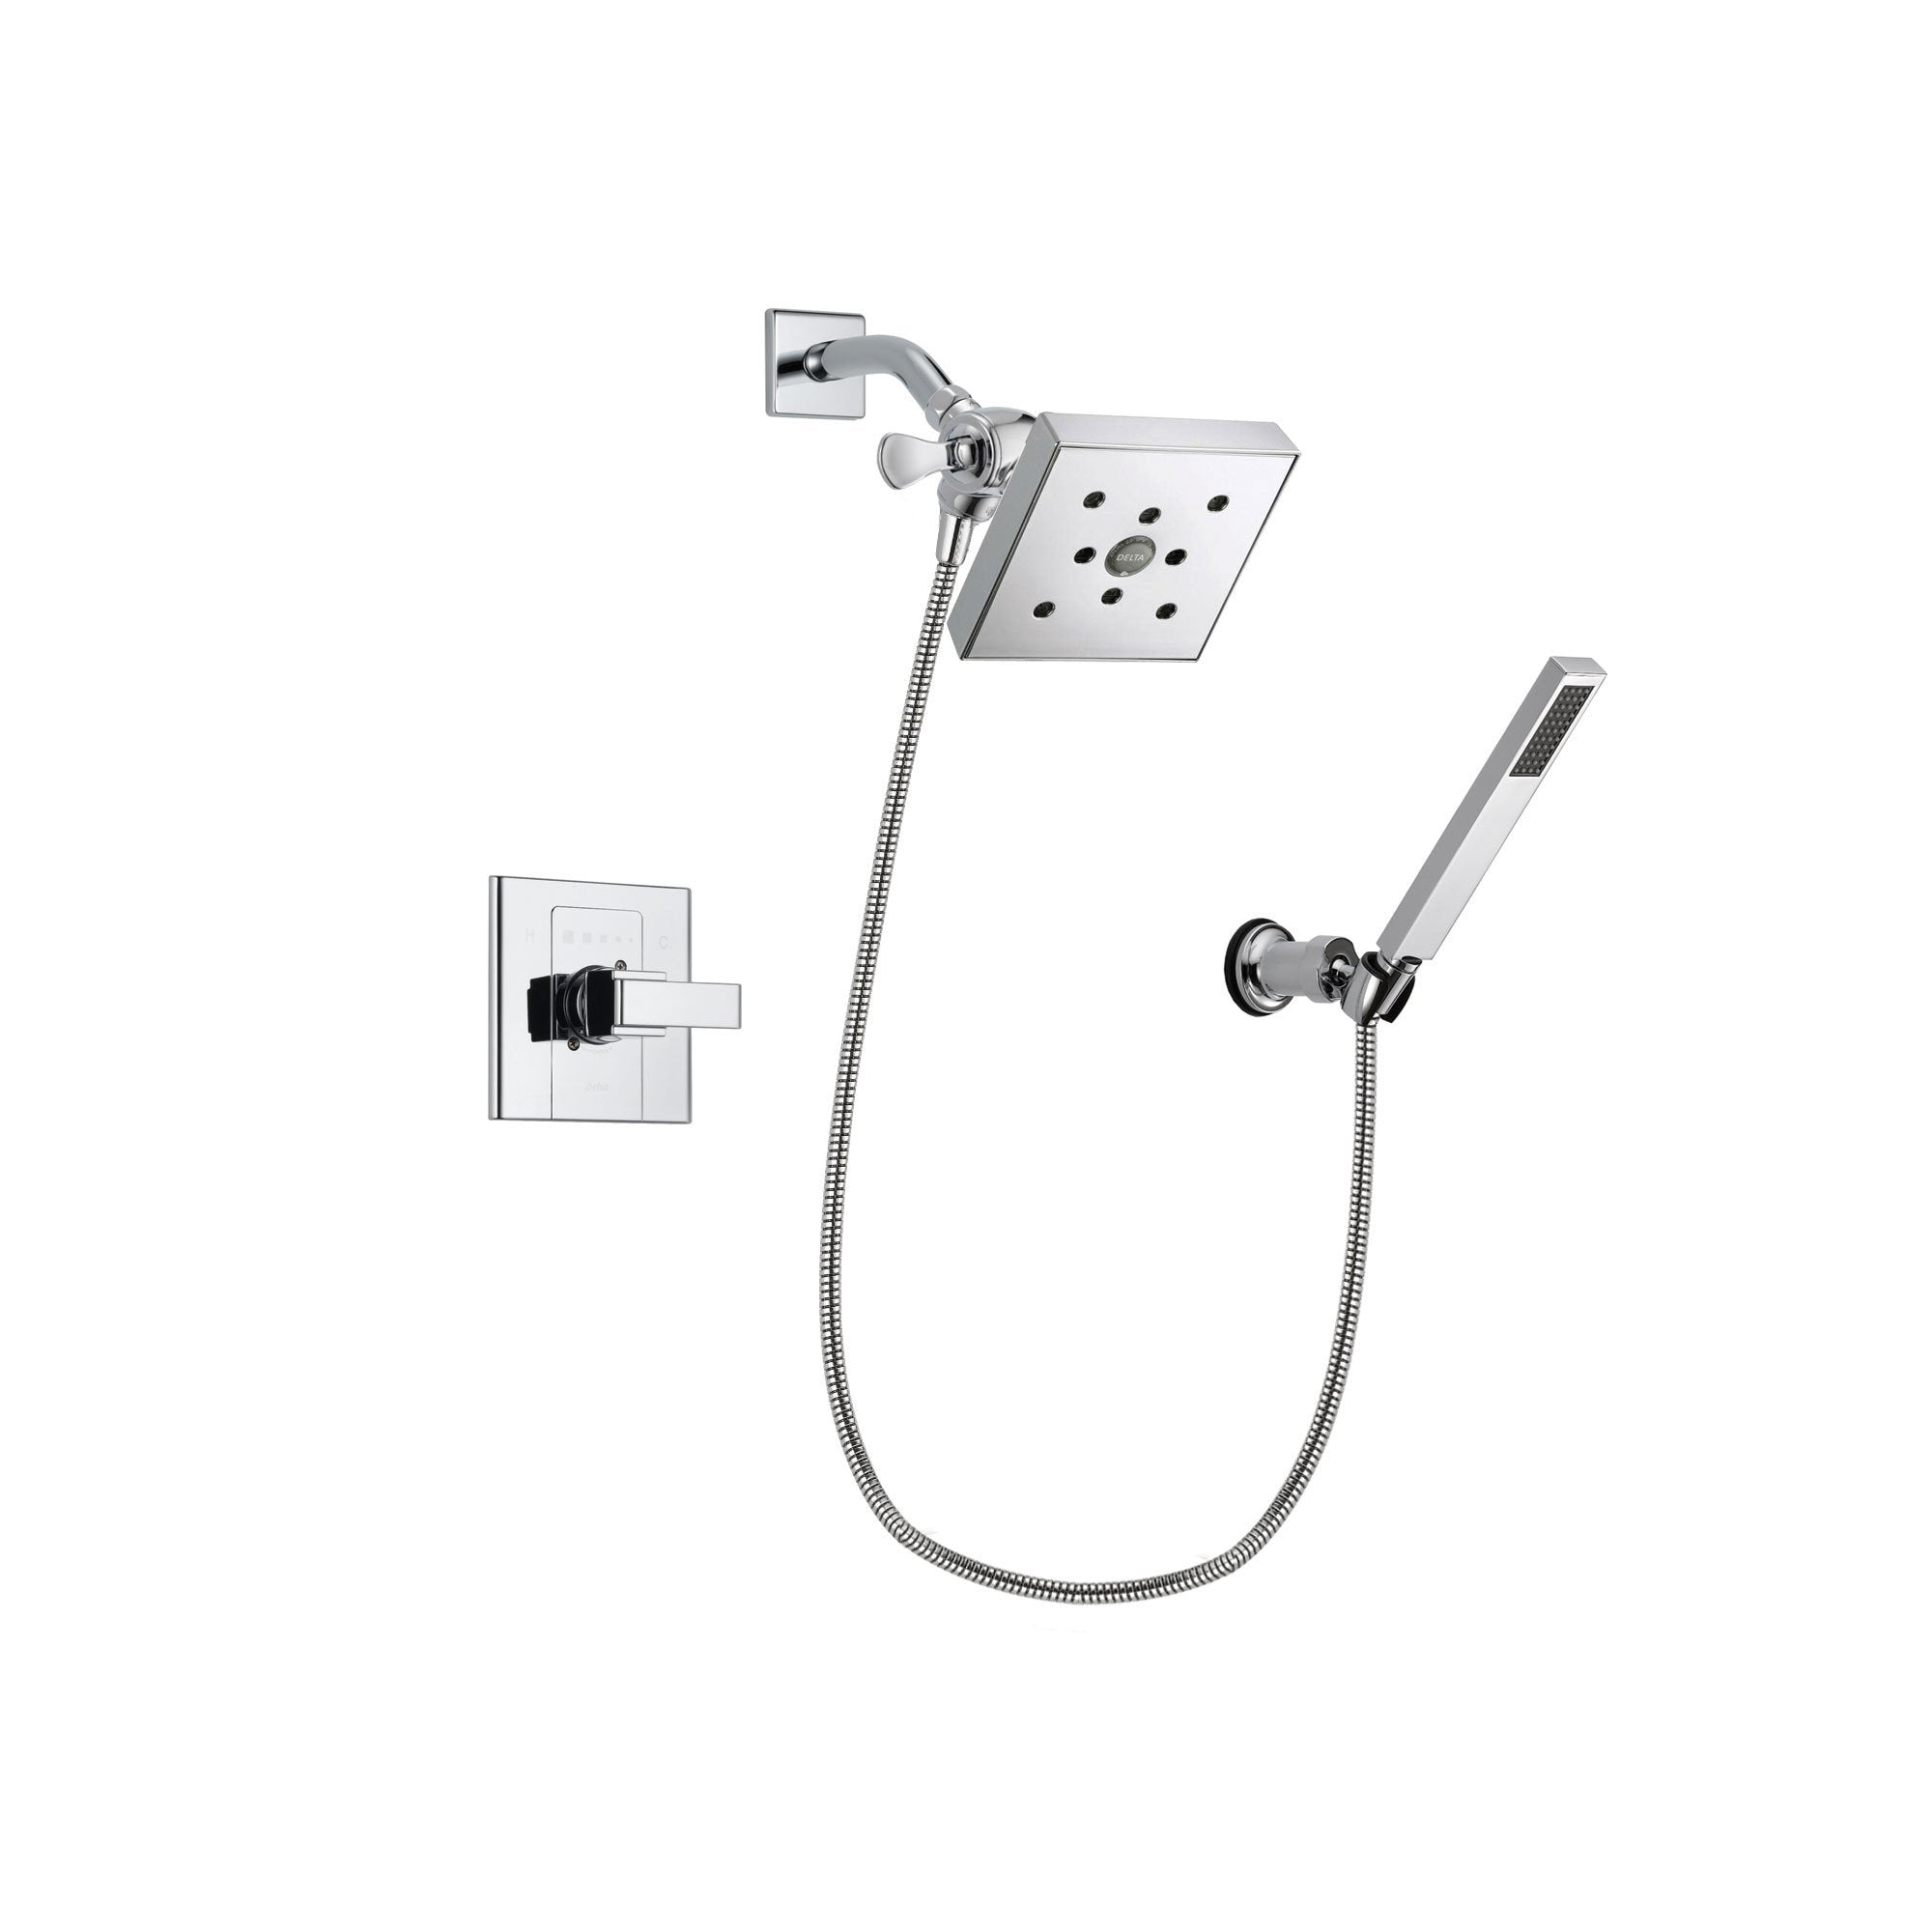 Delta Arzo Chrome Finish Shower Faucet System Package with Square Shower Head and Modern Handheld Shower Spray with Wall Bracket and Hose Includes Rough-in Valve DSP0140V